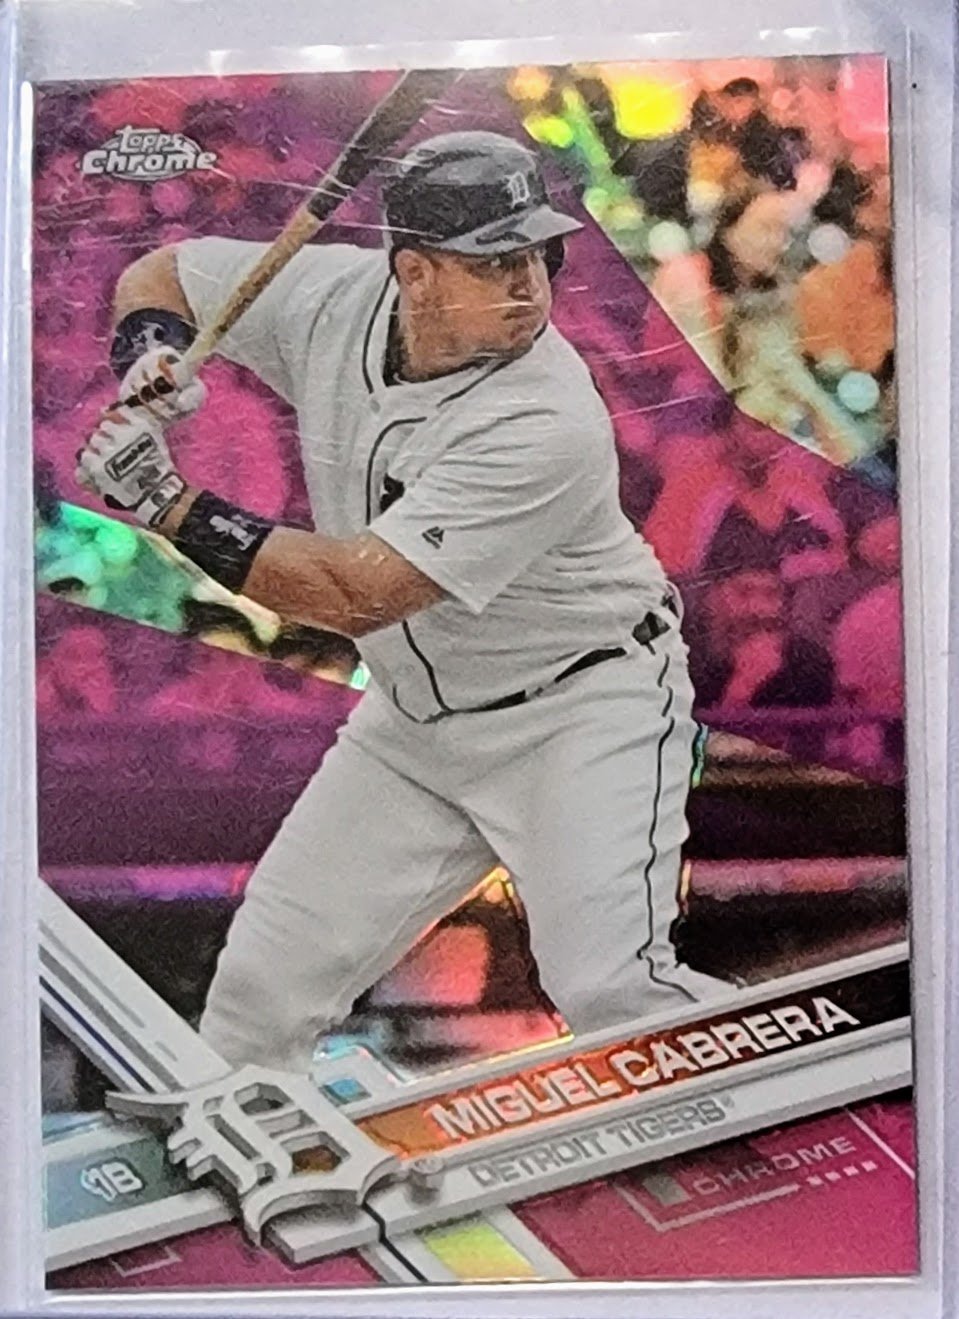 2017 Topps Chrome Miguel Cabrera Pink Refractor Baseball Card TPTV simple Xclusive Collectibles   